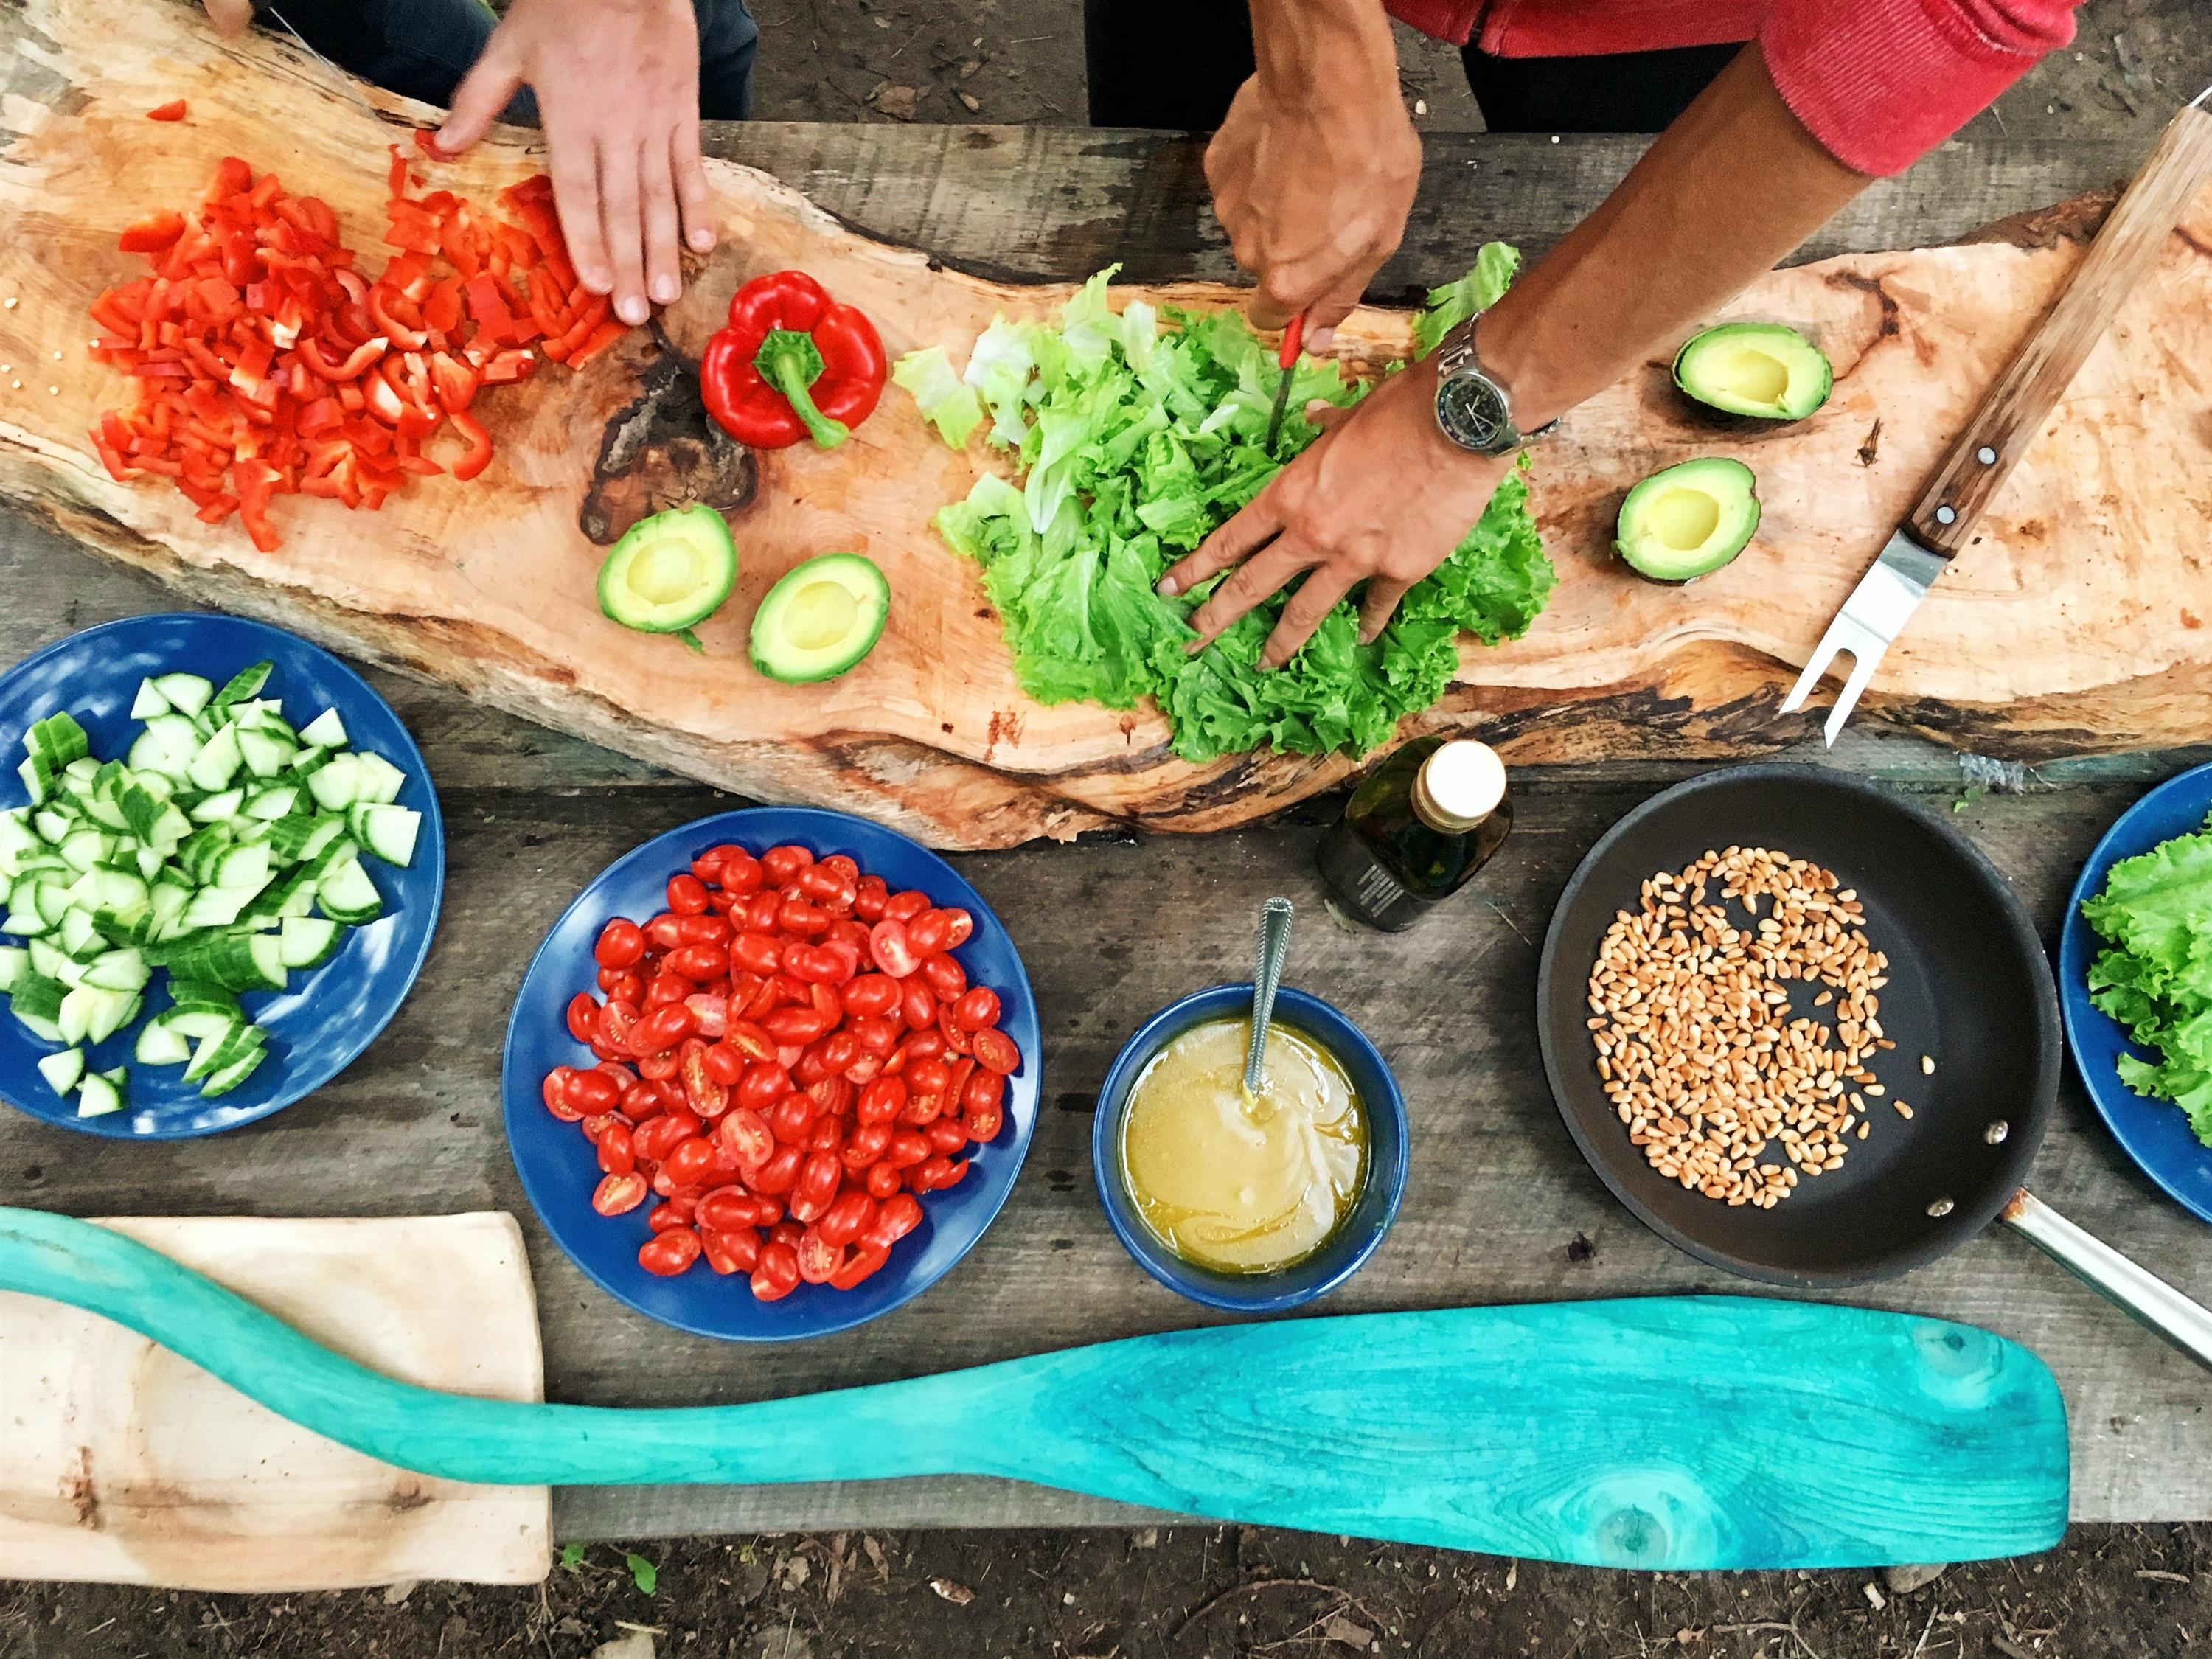 Setting up Your Outdoor Kitchen - A Sure Way to Cook Awesome Foods